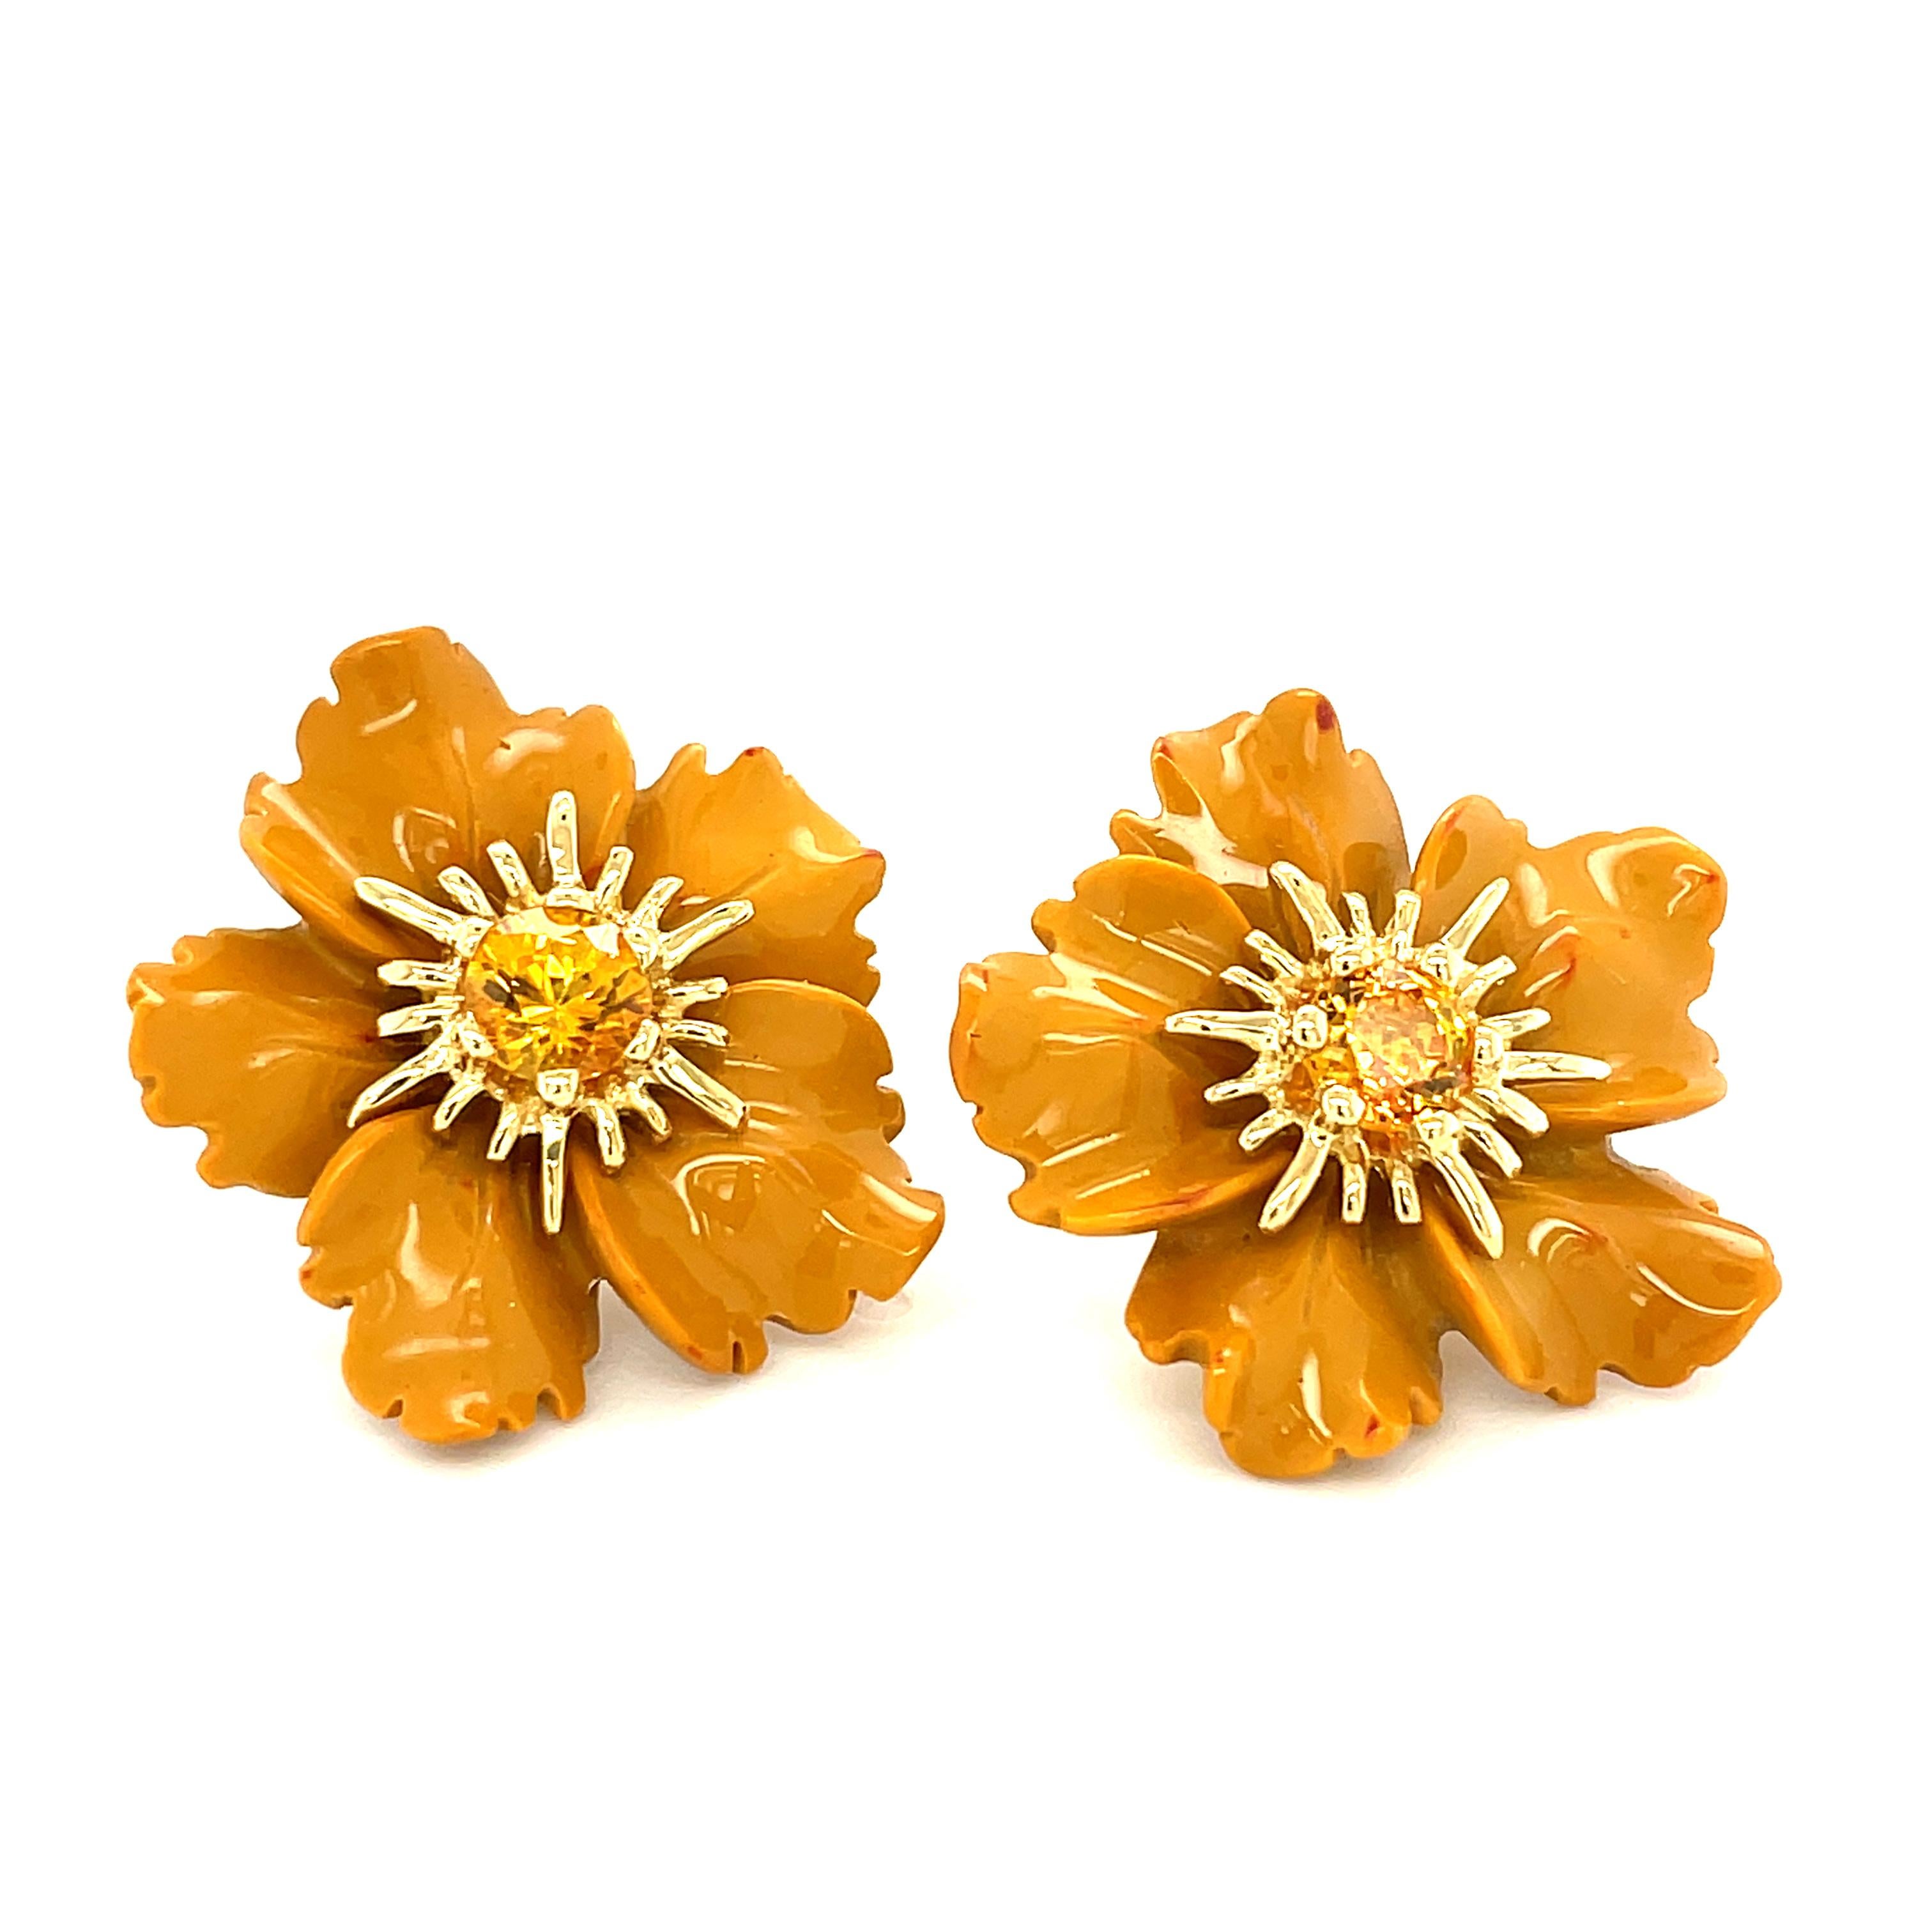 Carved Jasper Flower Earring Jacket with Yellow Sapphire and Gold Stamen Posts In New Condition For Sale In Los Angeles, CA